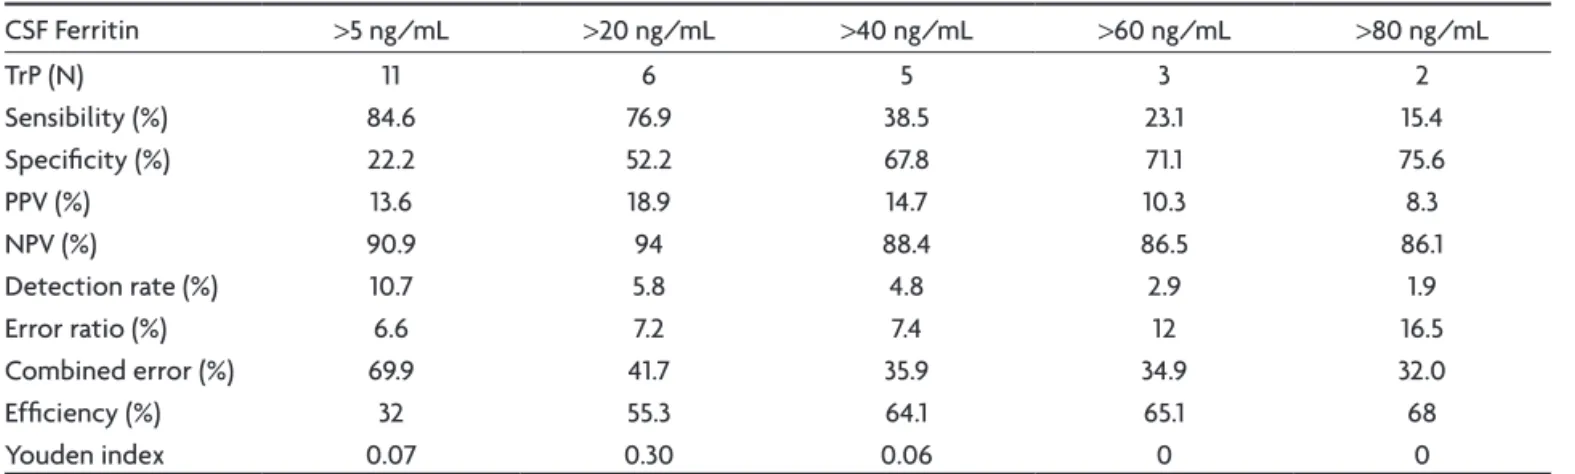 Table 2. Operational characteristics of CSF ferritin with different cut-offs.